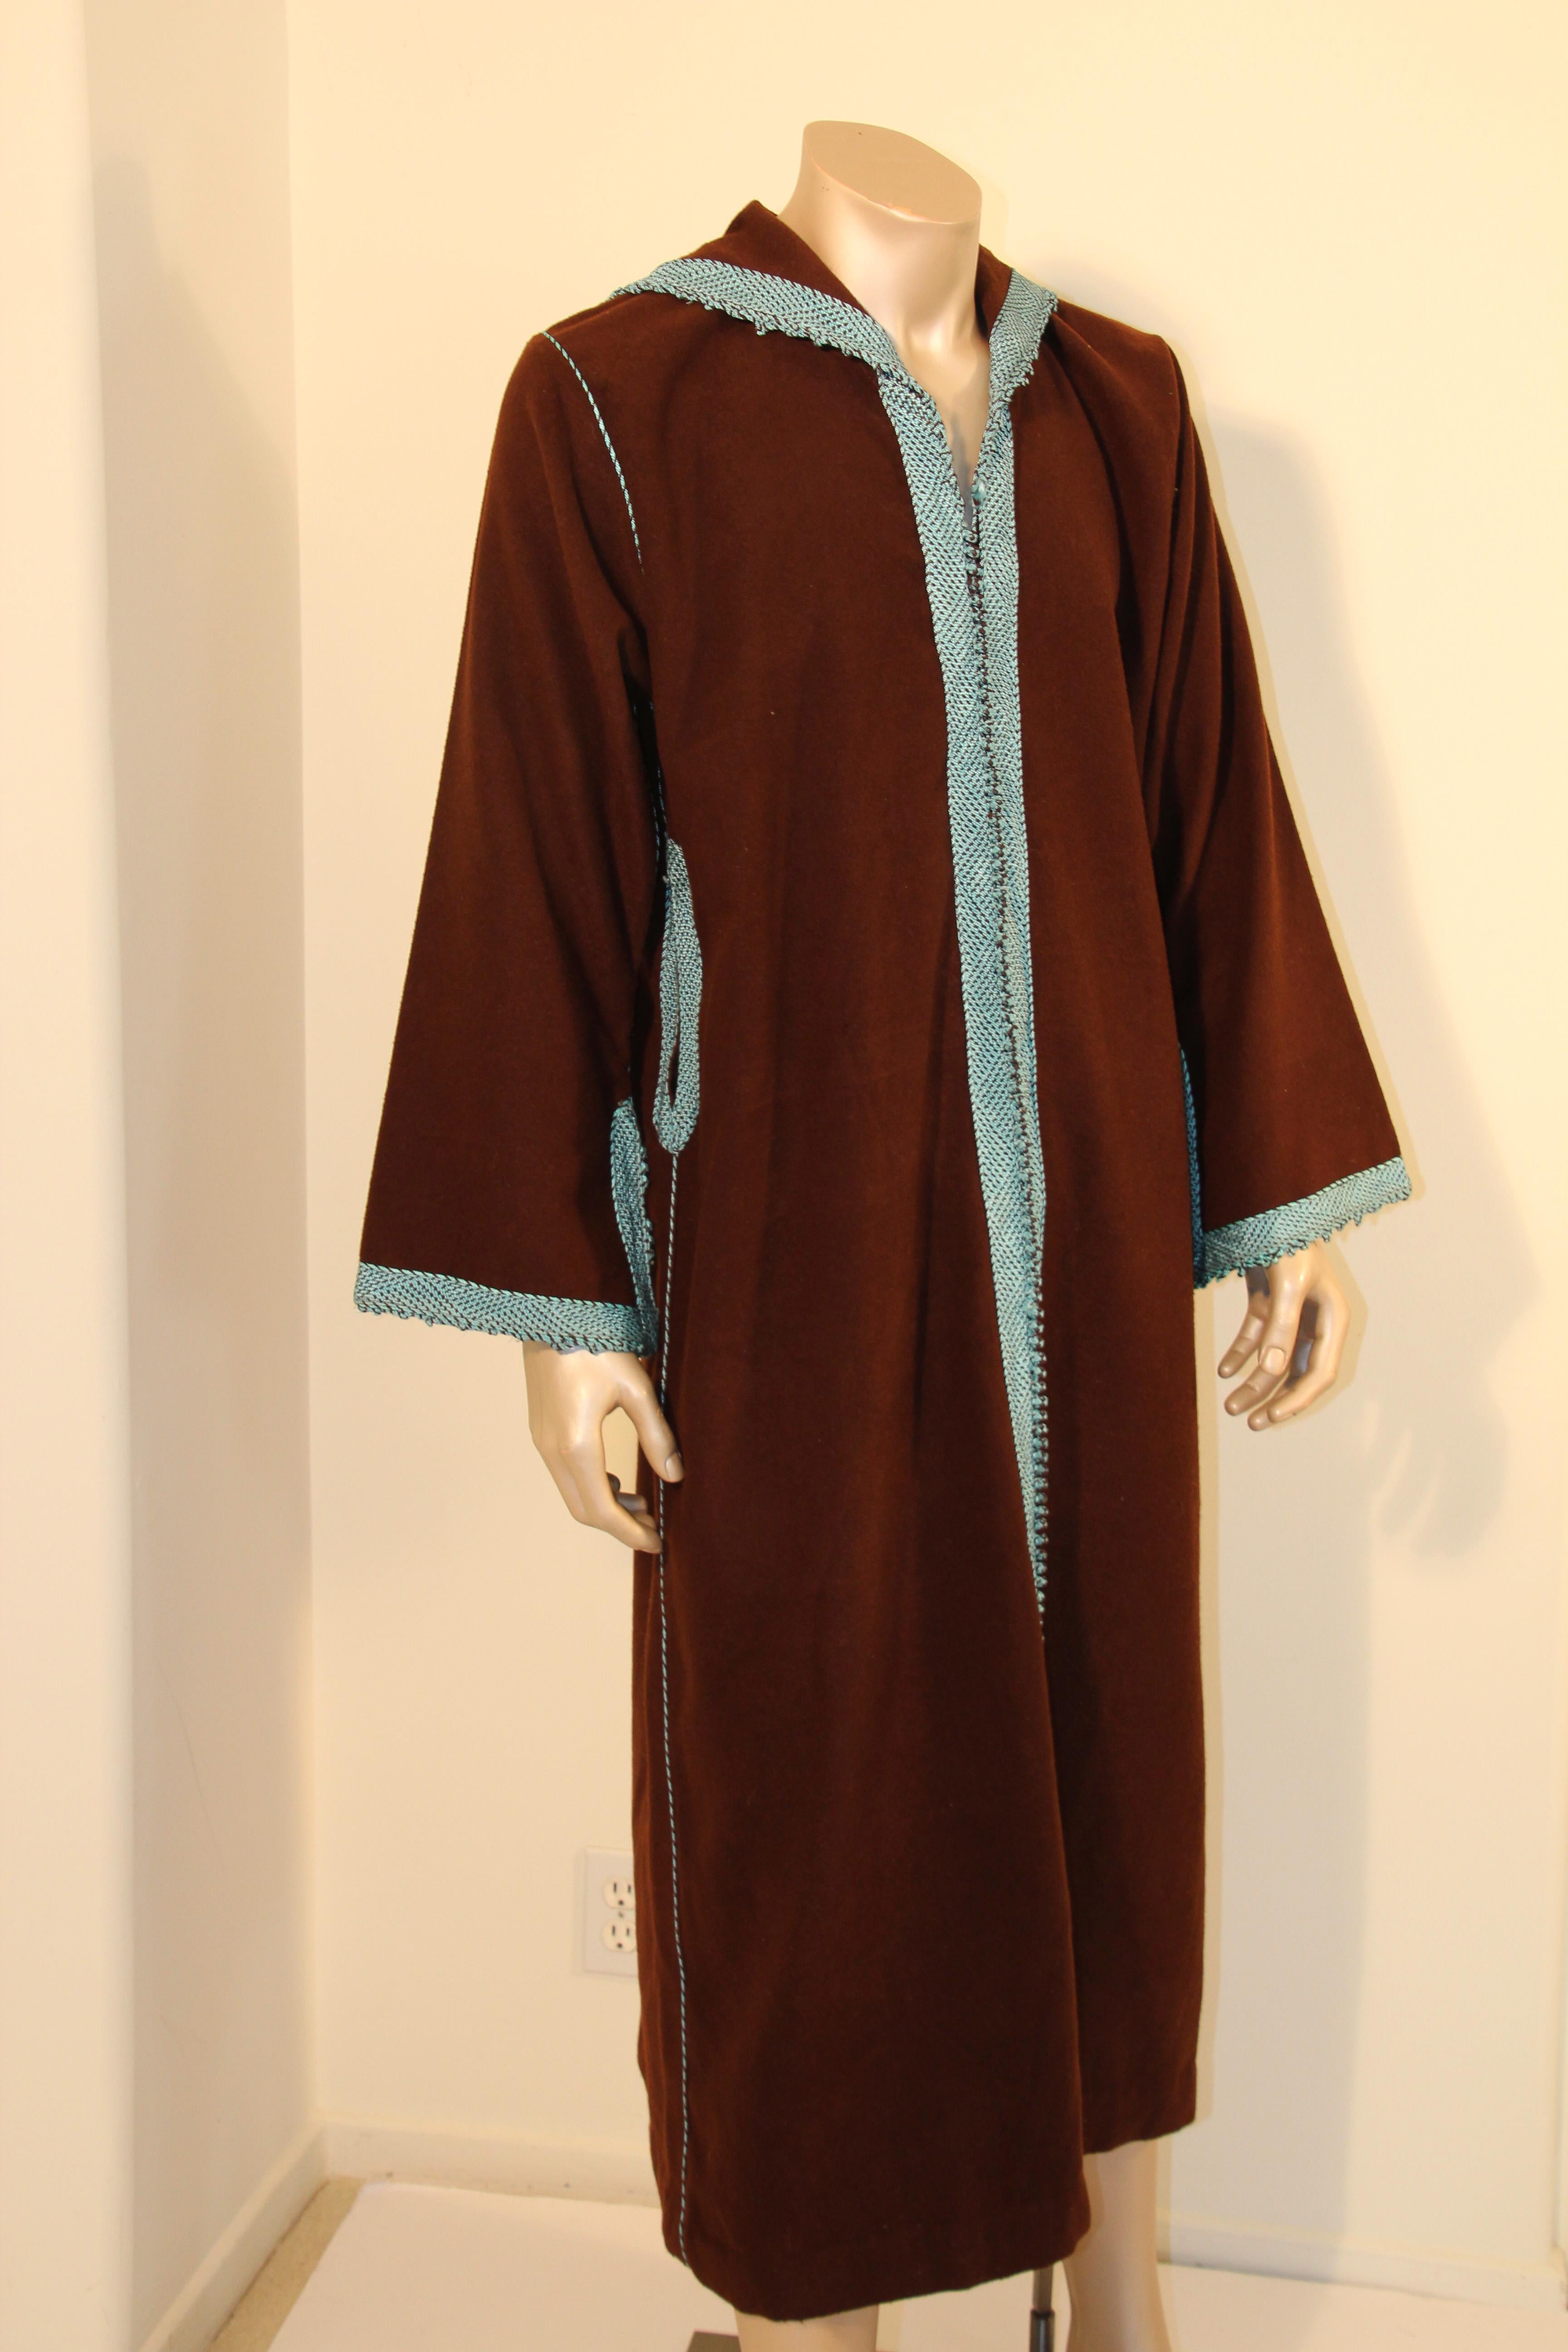 Moroccan Cashmere Brown and Turquoise Caftan 1980s Robe For Sale